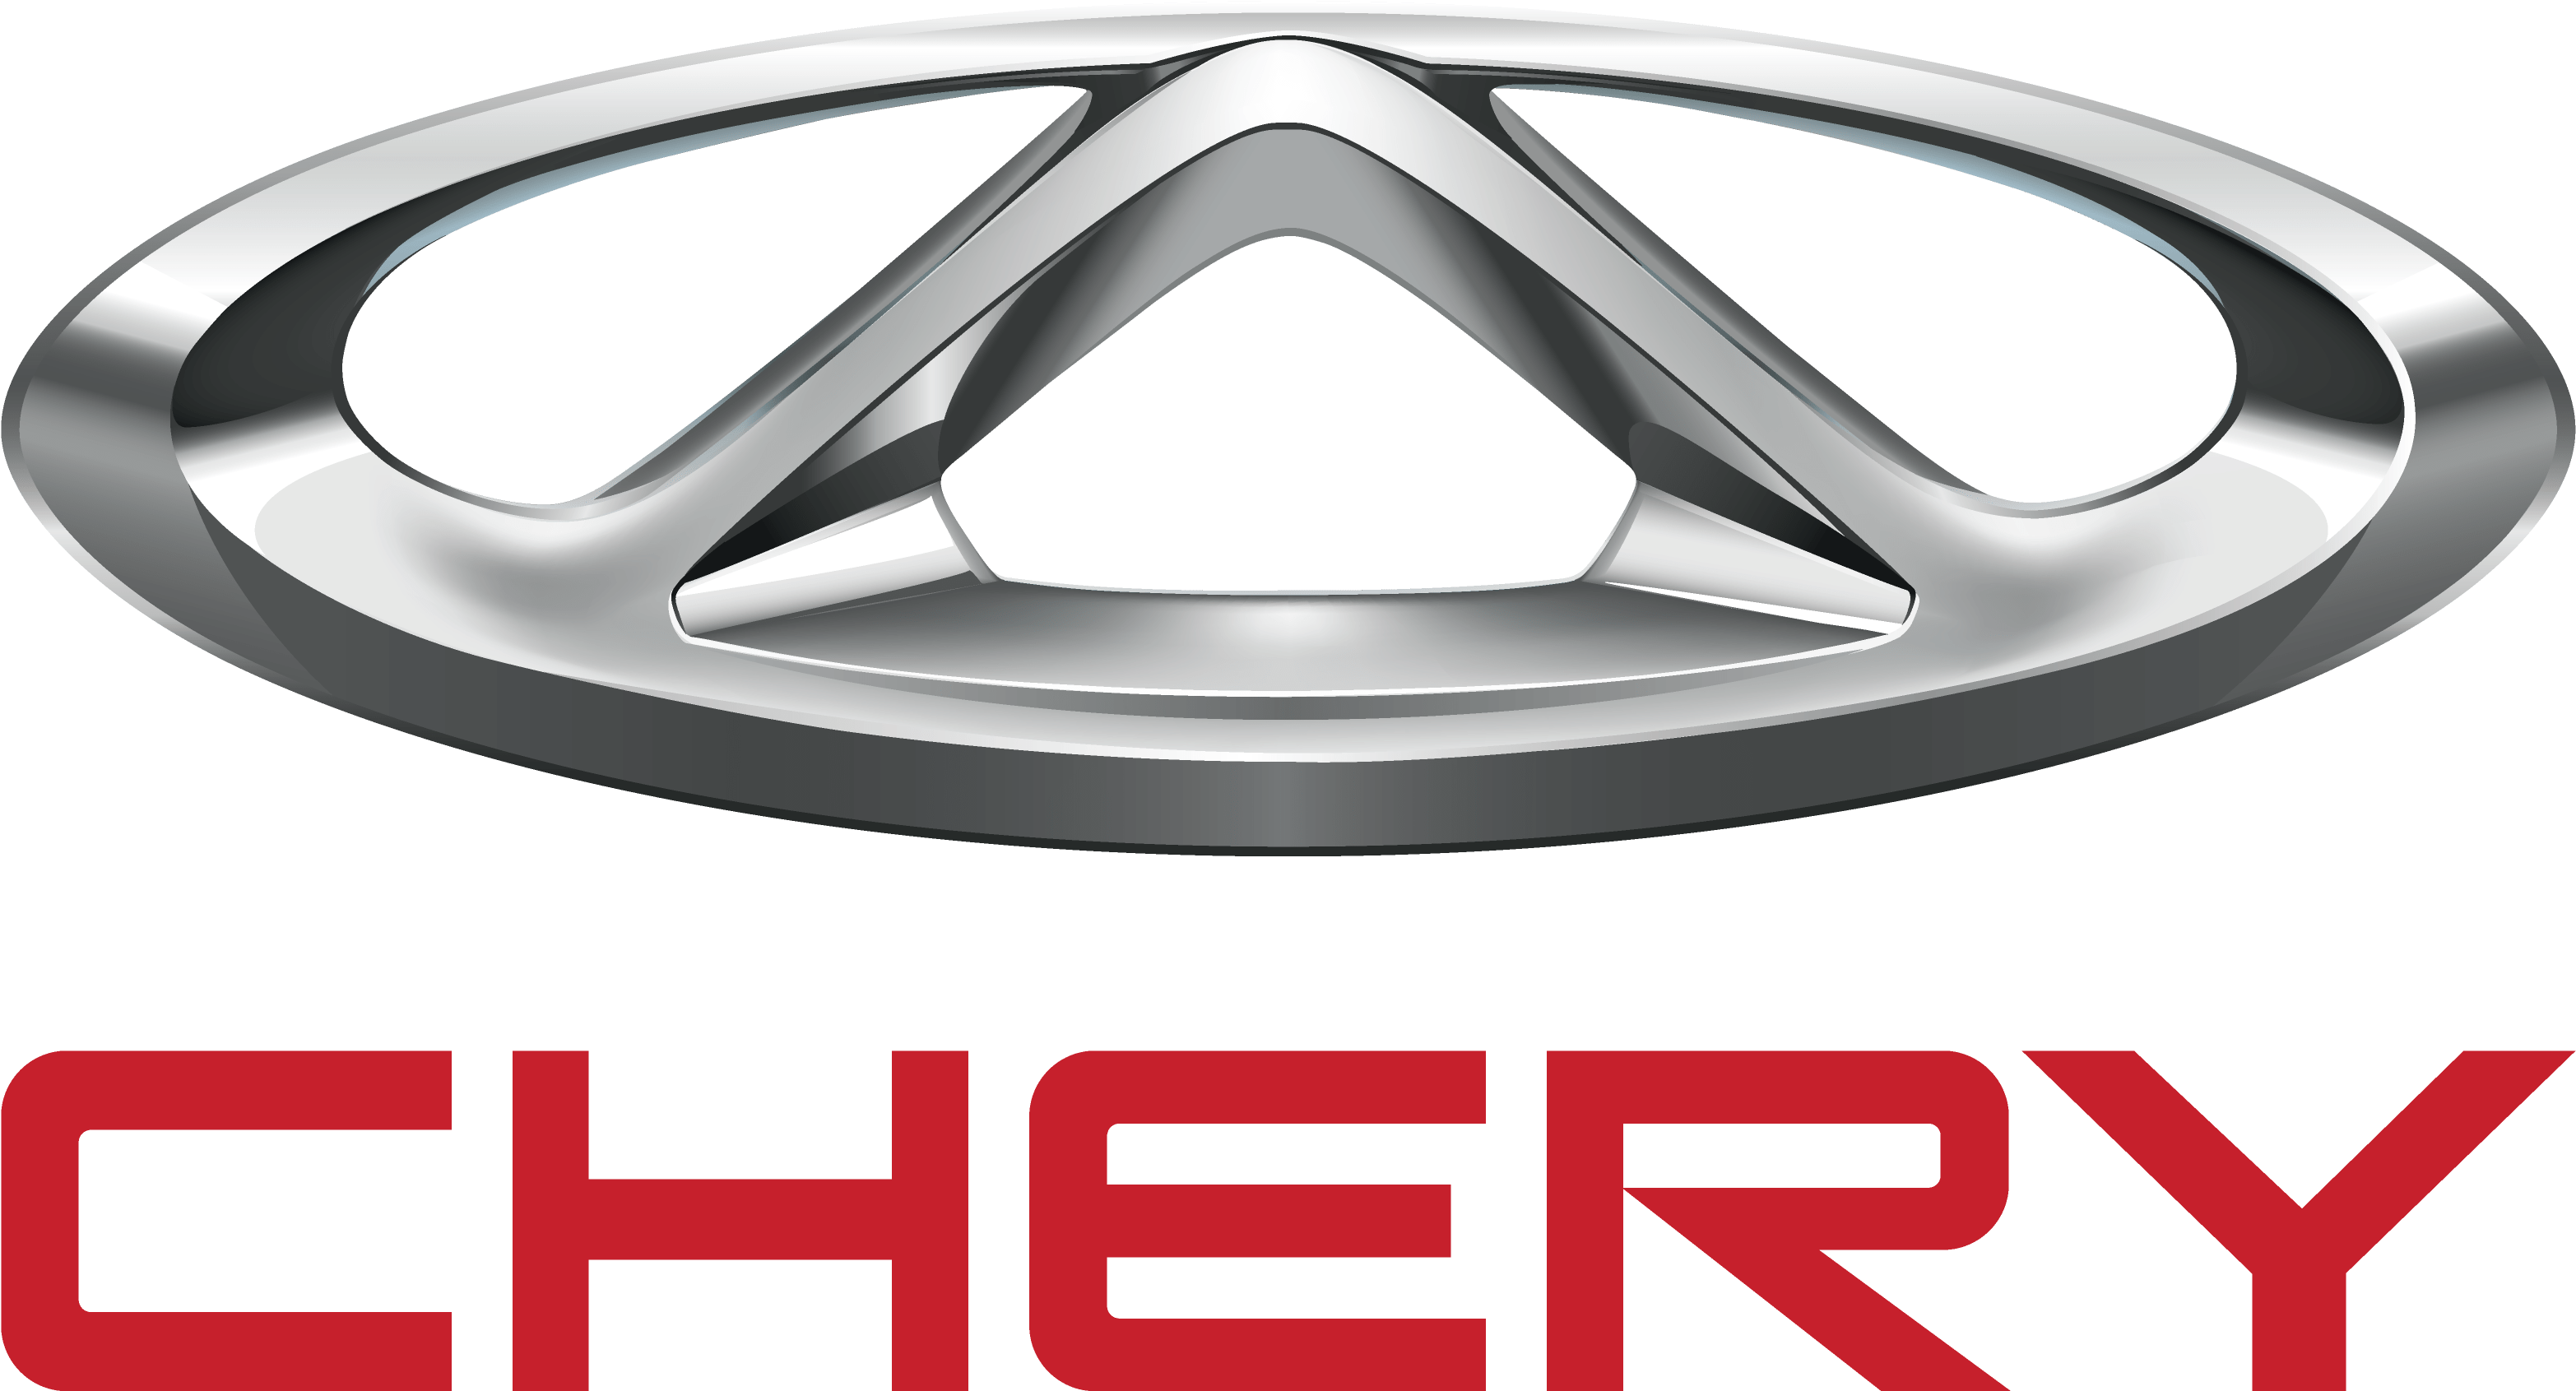 Chery Logo - Download Chery Logo - Cherry Car Logo Png PNG Image with No ...